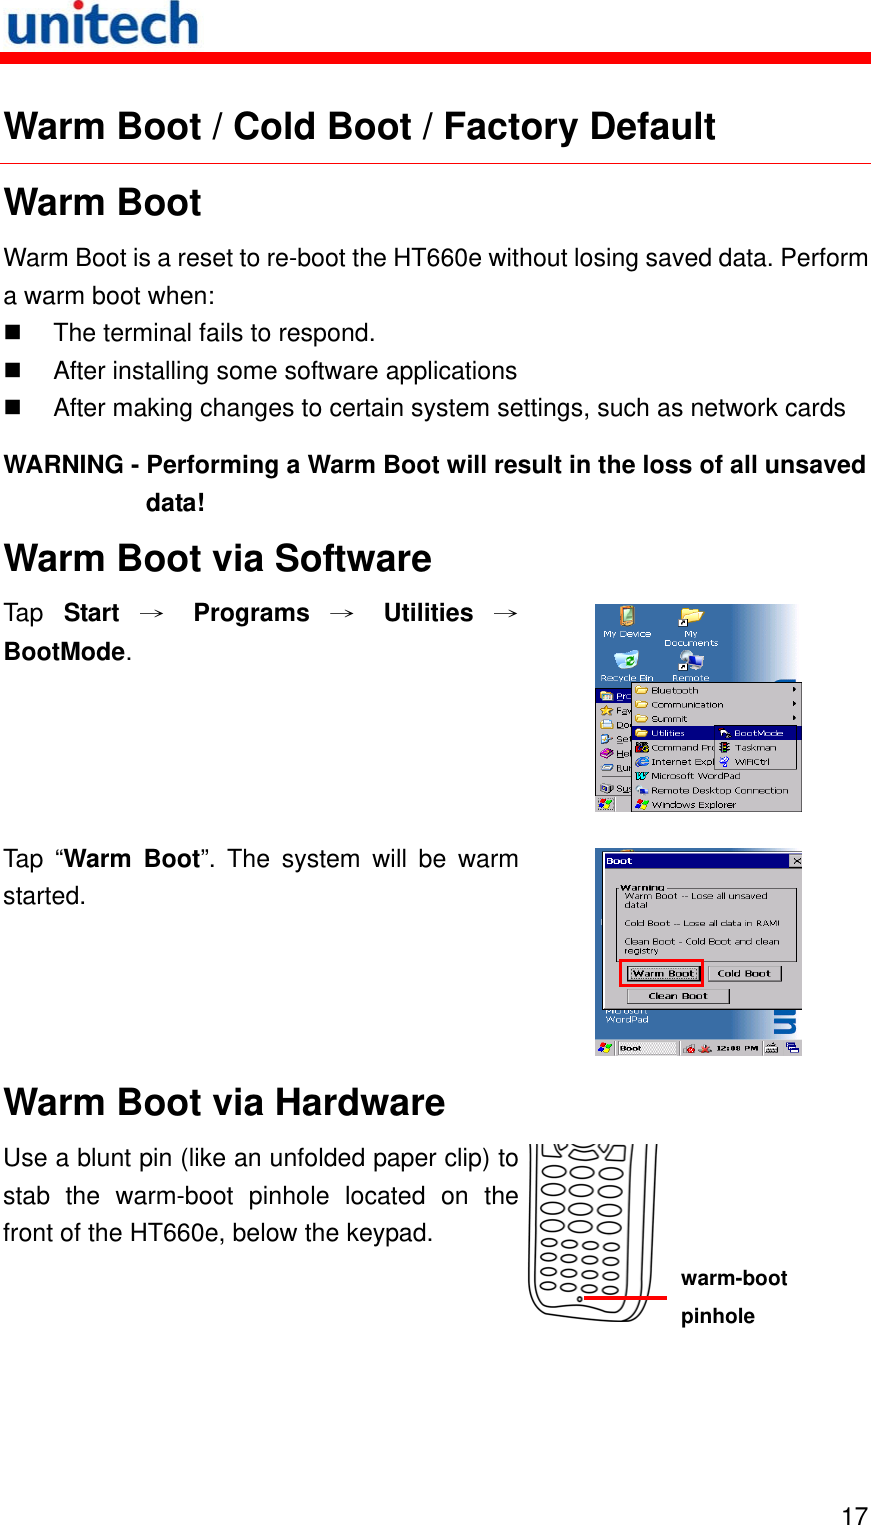   17 Warm Boot / Cold Boot / Factory Default Warm Boot Warm Boot is a reset to re-boot the HT660e without losing saved data. Perform a warm boot when:   The terminal fails to respond.   After installing some software applications   After making changes to certain system settings, such as network cards WARNING - Performing a Warm Boot will result in the loss of all unsaved data! Warm Boot via Software Tap  Start → Programs → Utilities →BootMode.   Tap “Warm Boot”. The system will be warm started.  Warm Boot via Hardware Use a blunt pin (like an unfolded paper clip) to stab the warm-boot pinhole located on the front of the HT660e, below the keypad.  warm-boot pinhole 